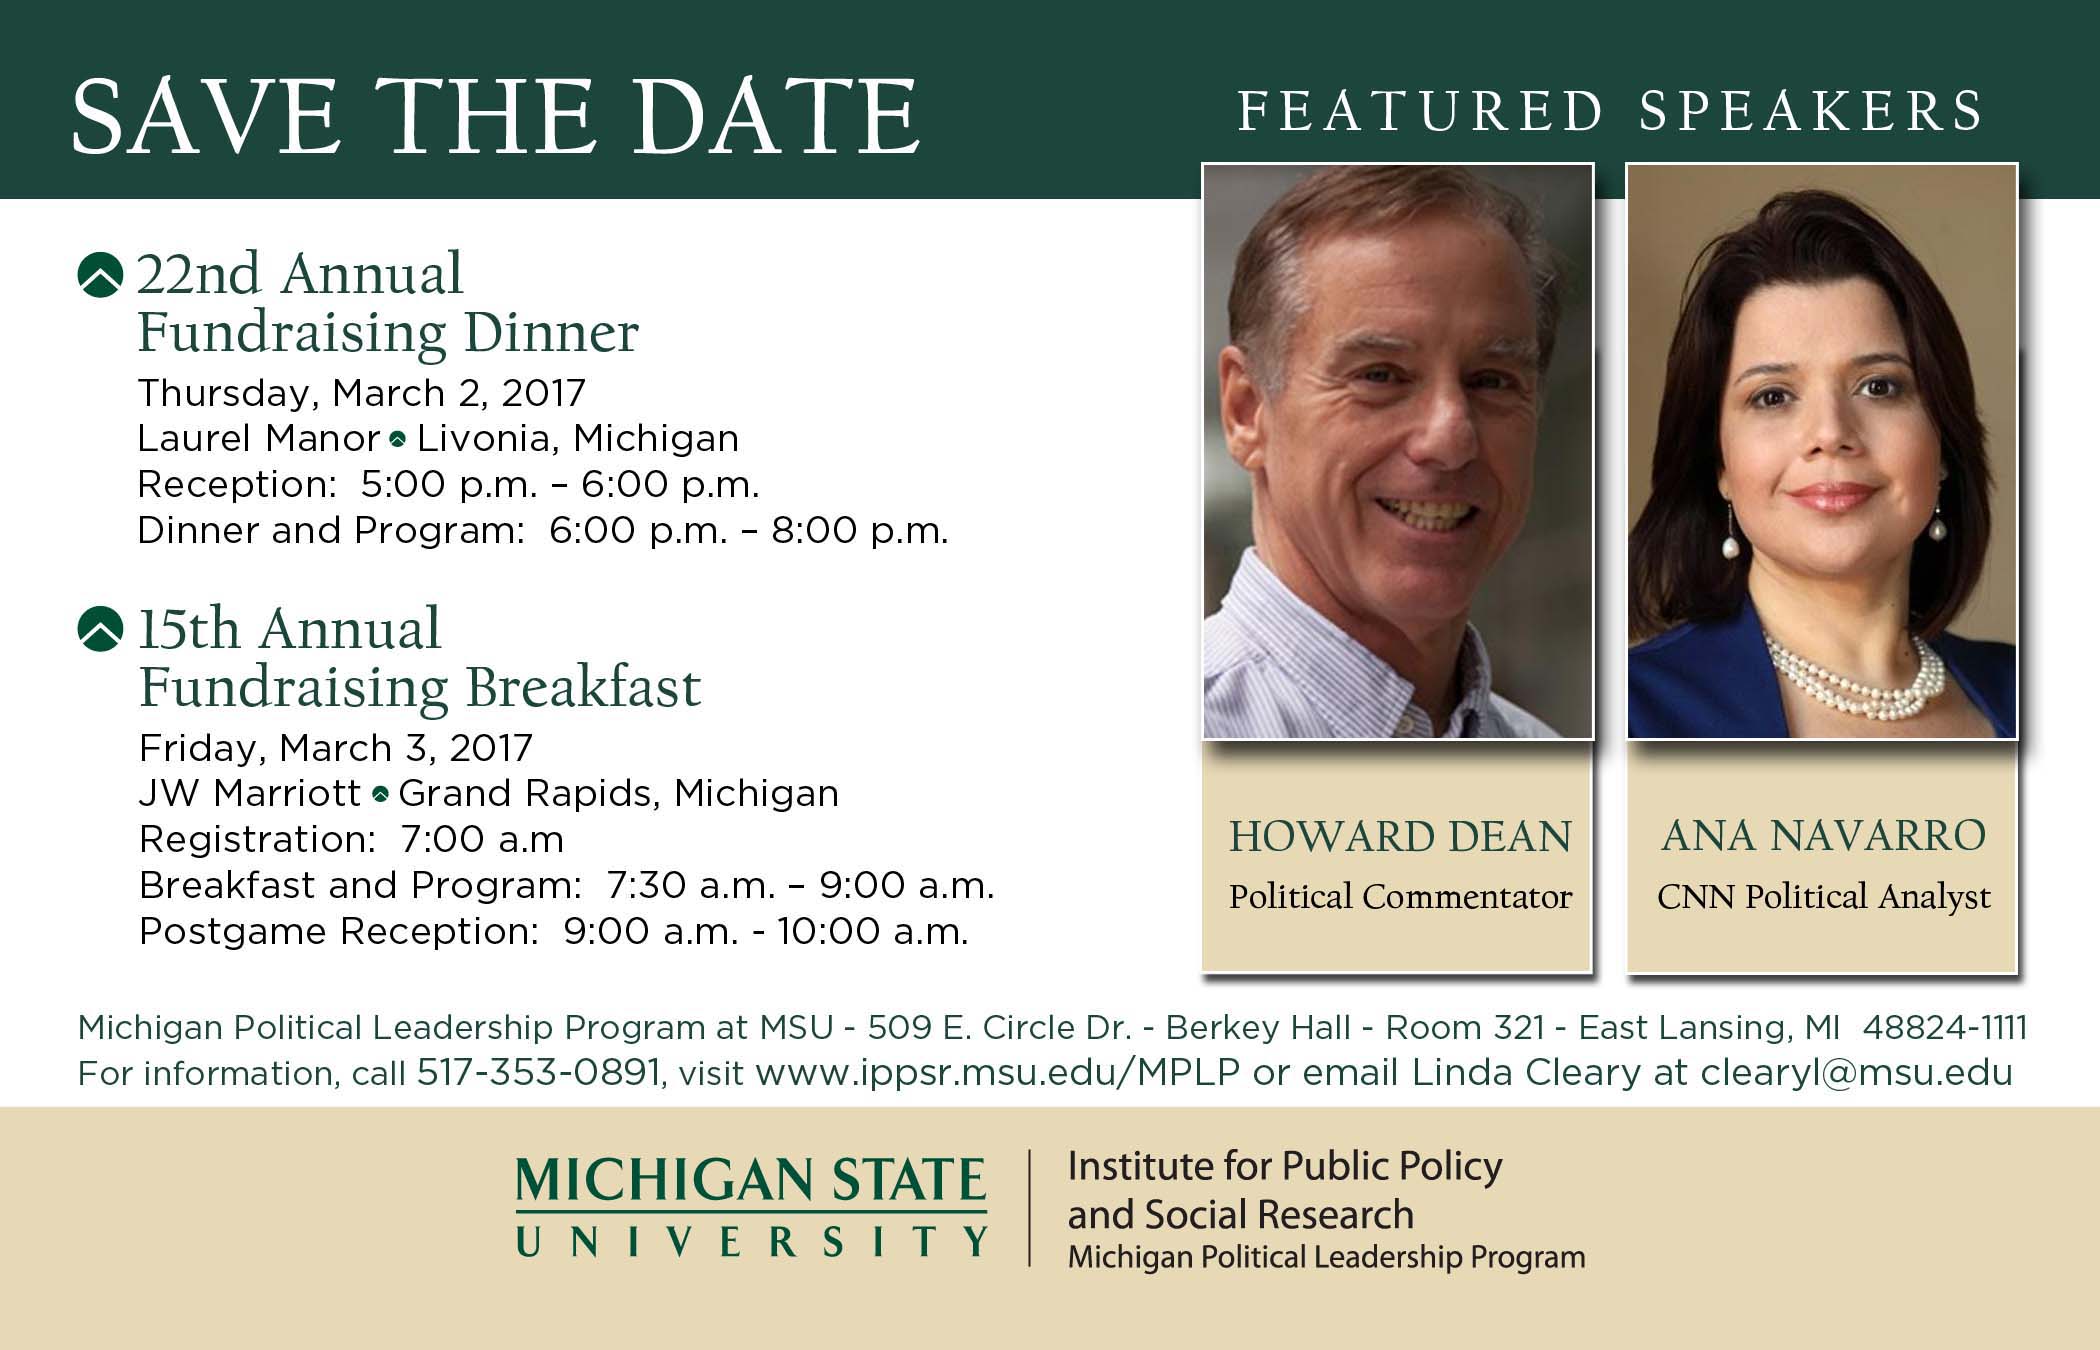 Save the Date card for Howard Dean and Ana Navarro